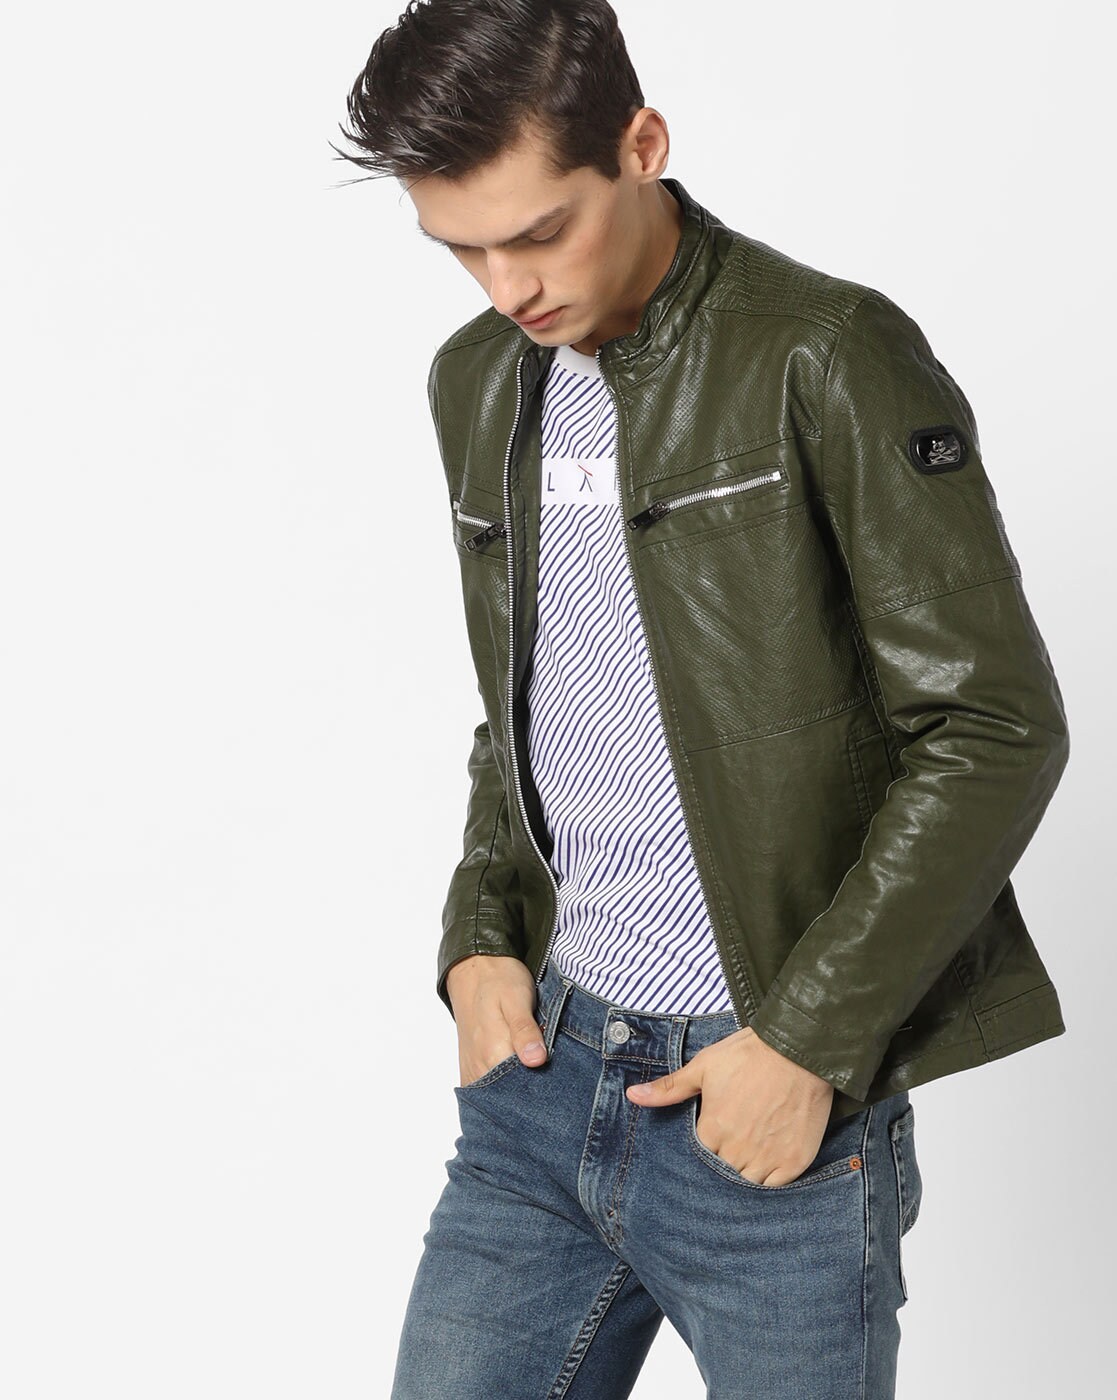 Buy Authentic Leather Jackets for Men Online in USA | Wear Ostrich